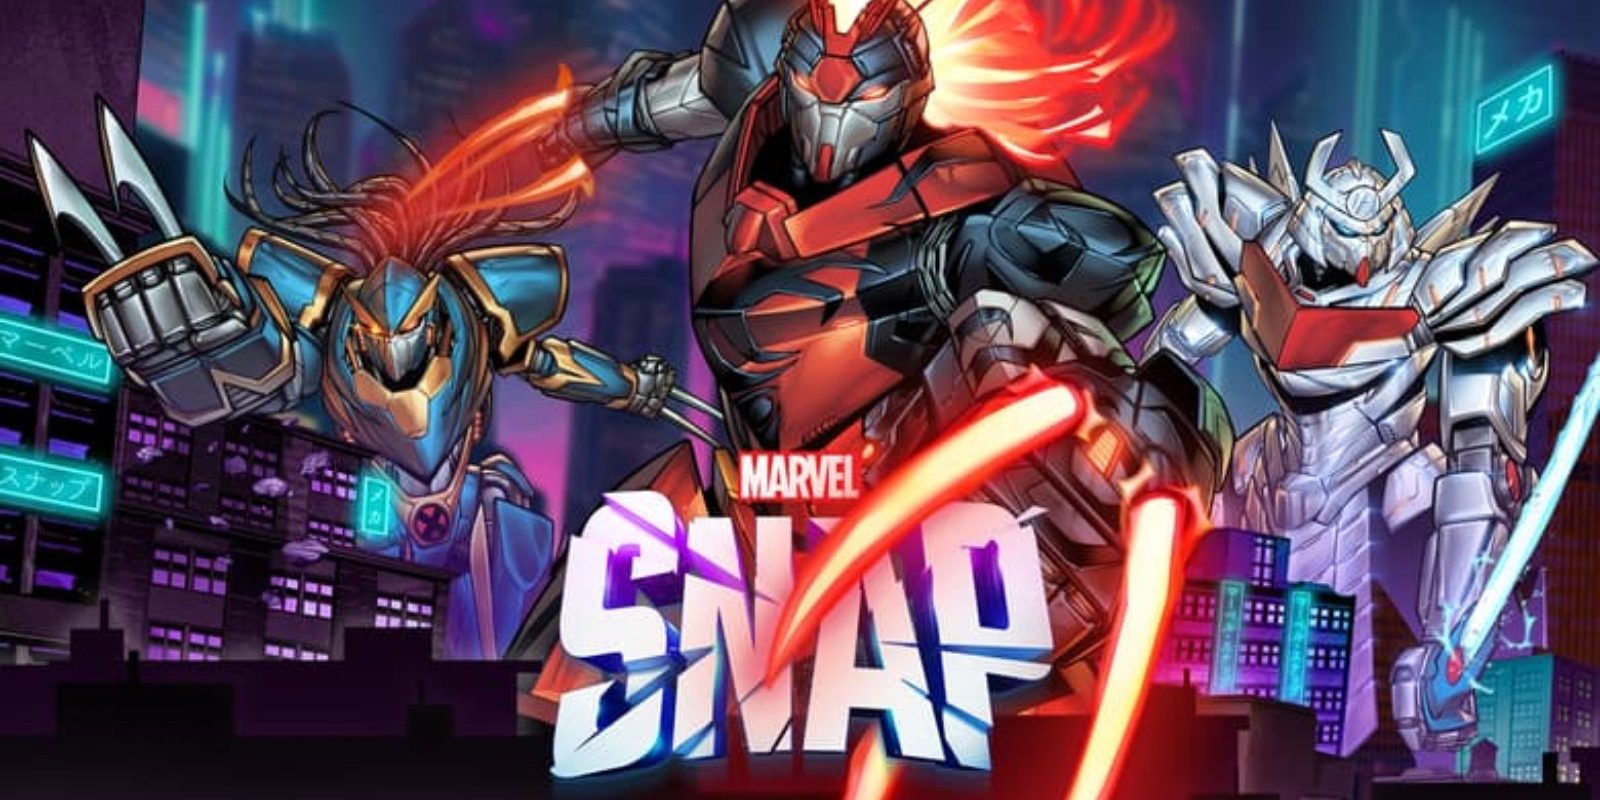 Marvel Snap viewership increased over 14,000 percent in 24 hours with enticing rewards